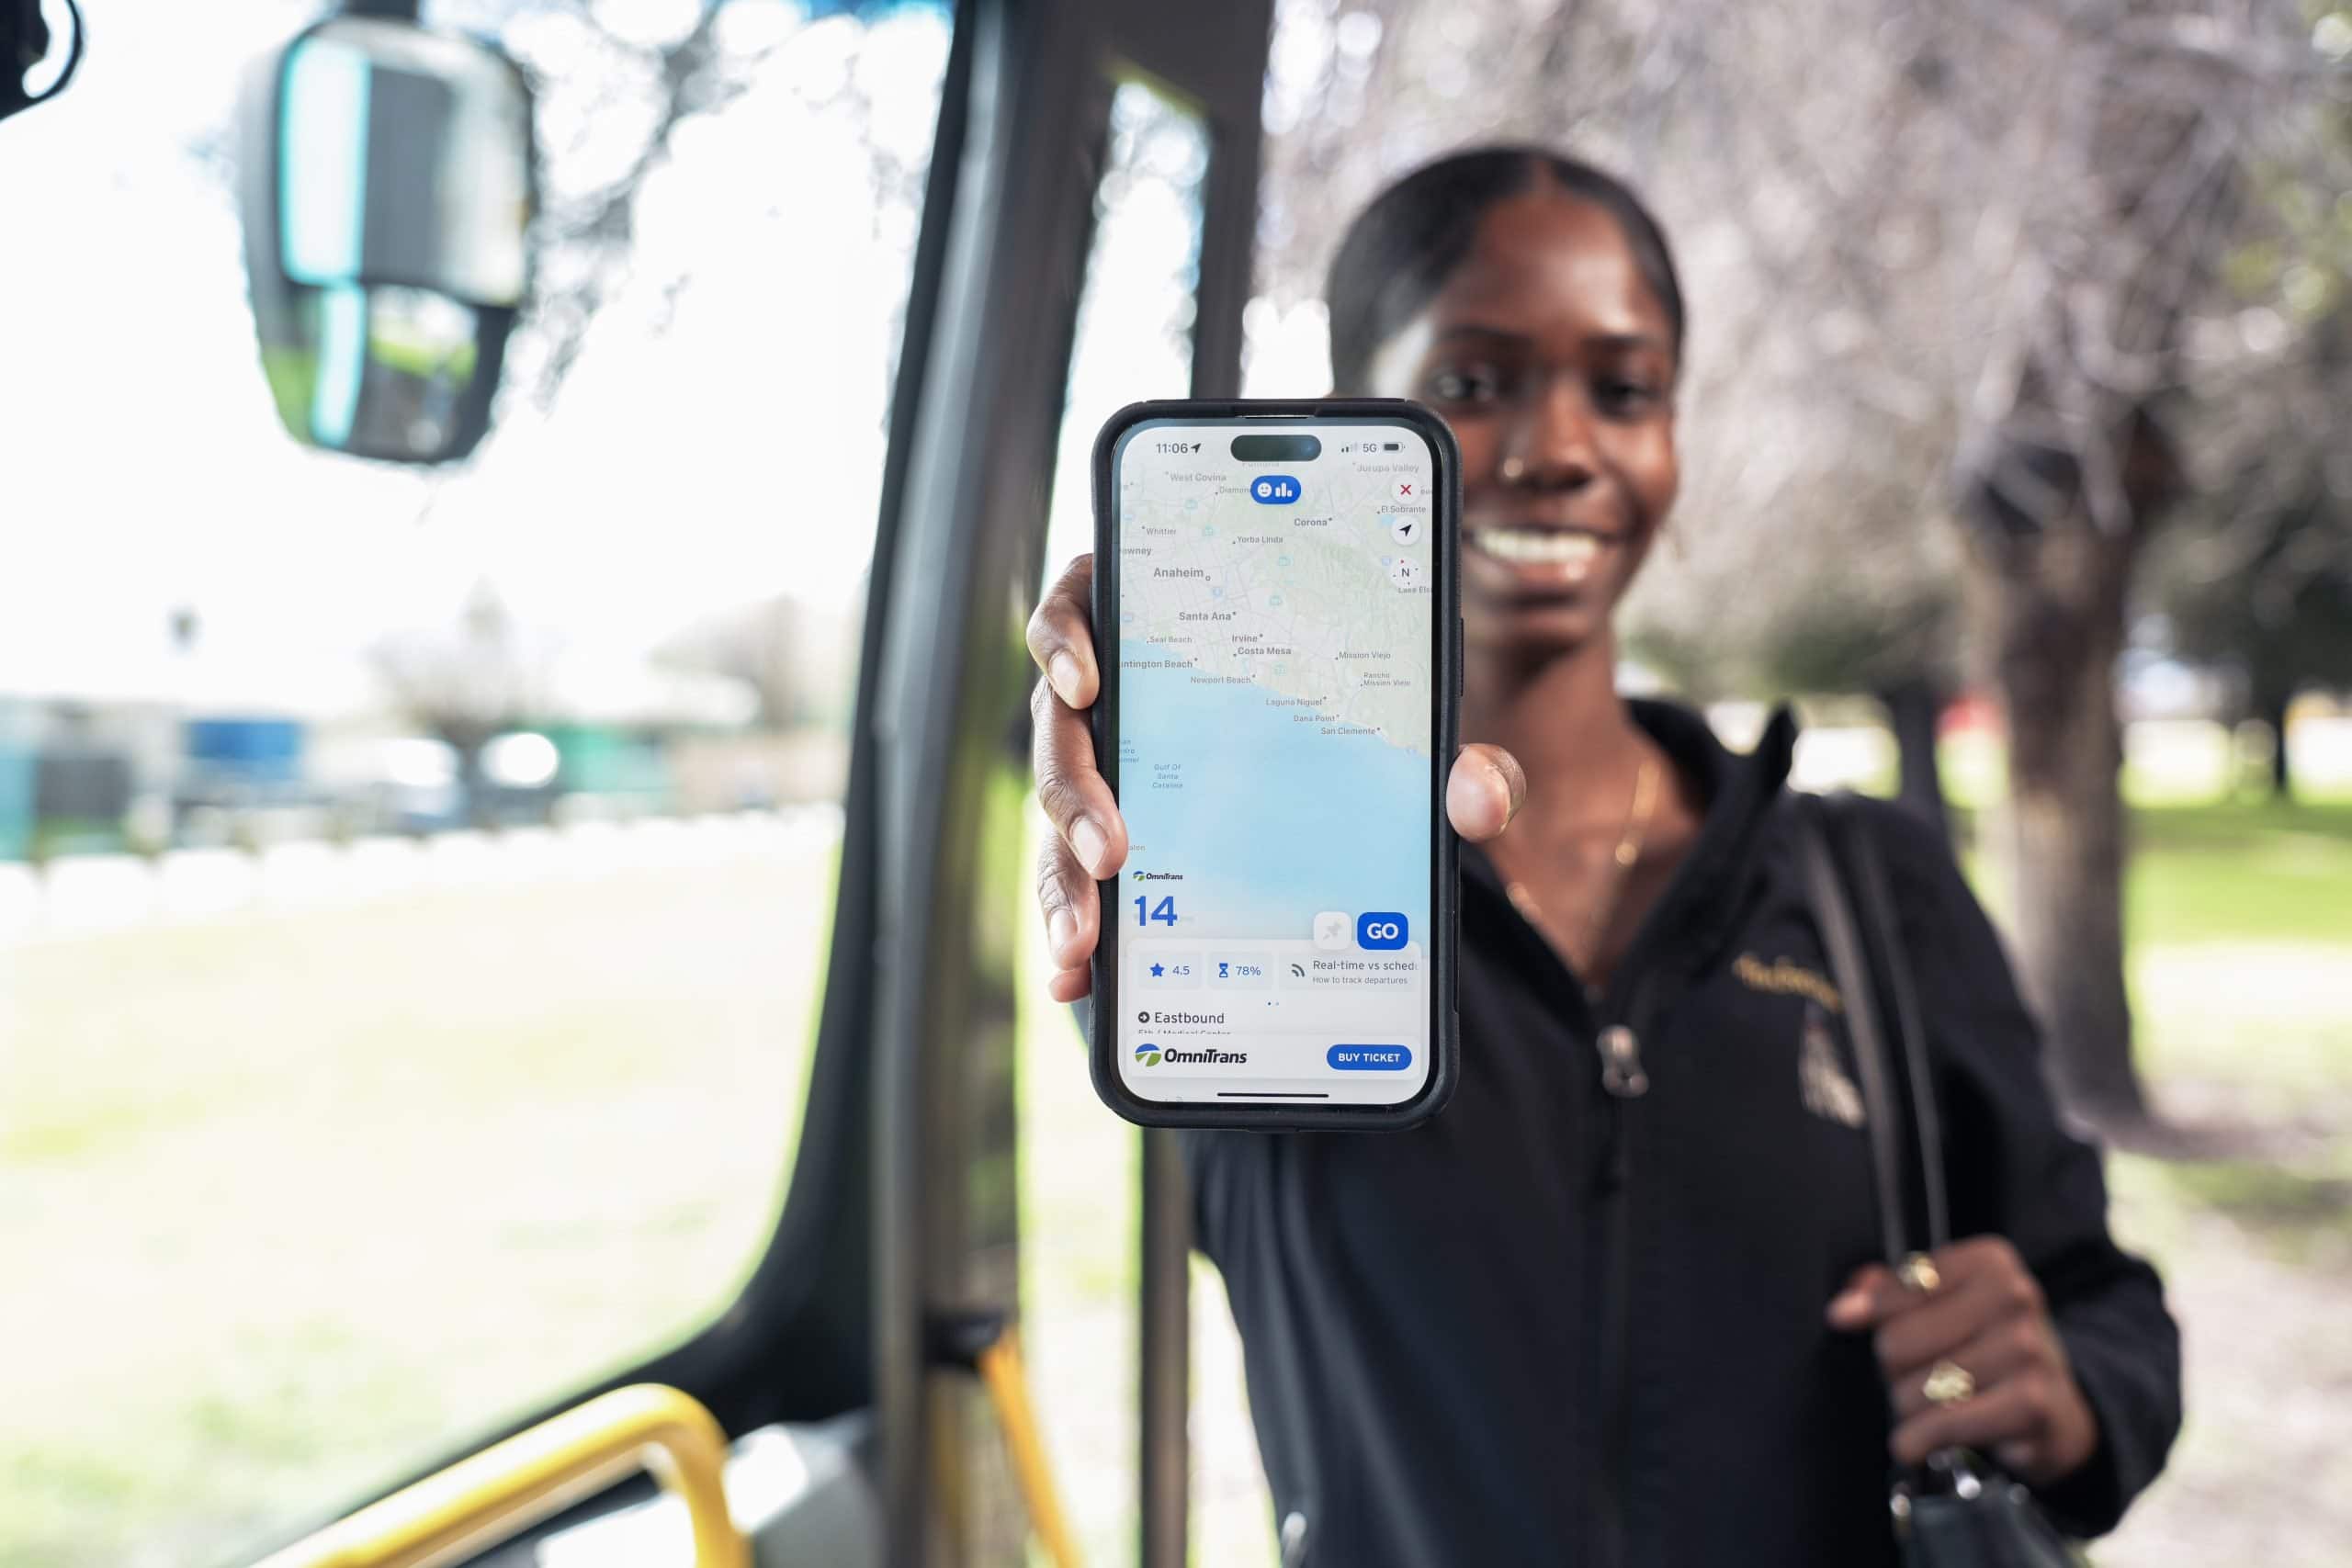 Transit App has been Upgraded with OmniRide Fare Option